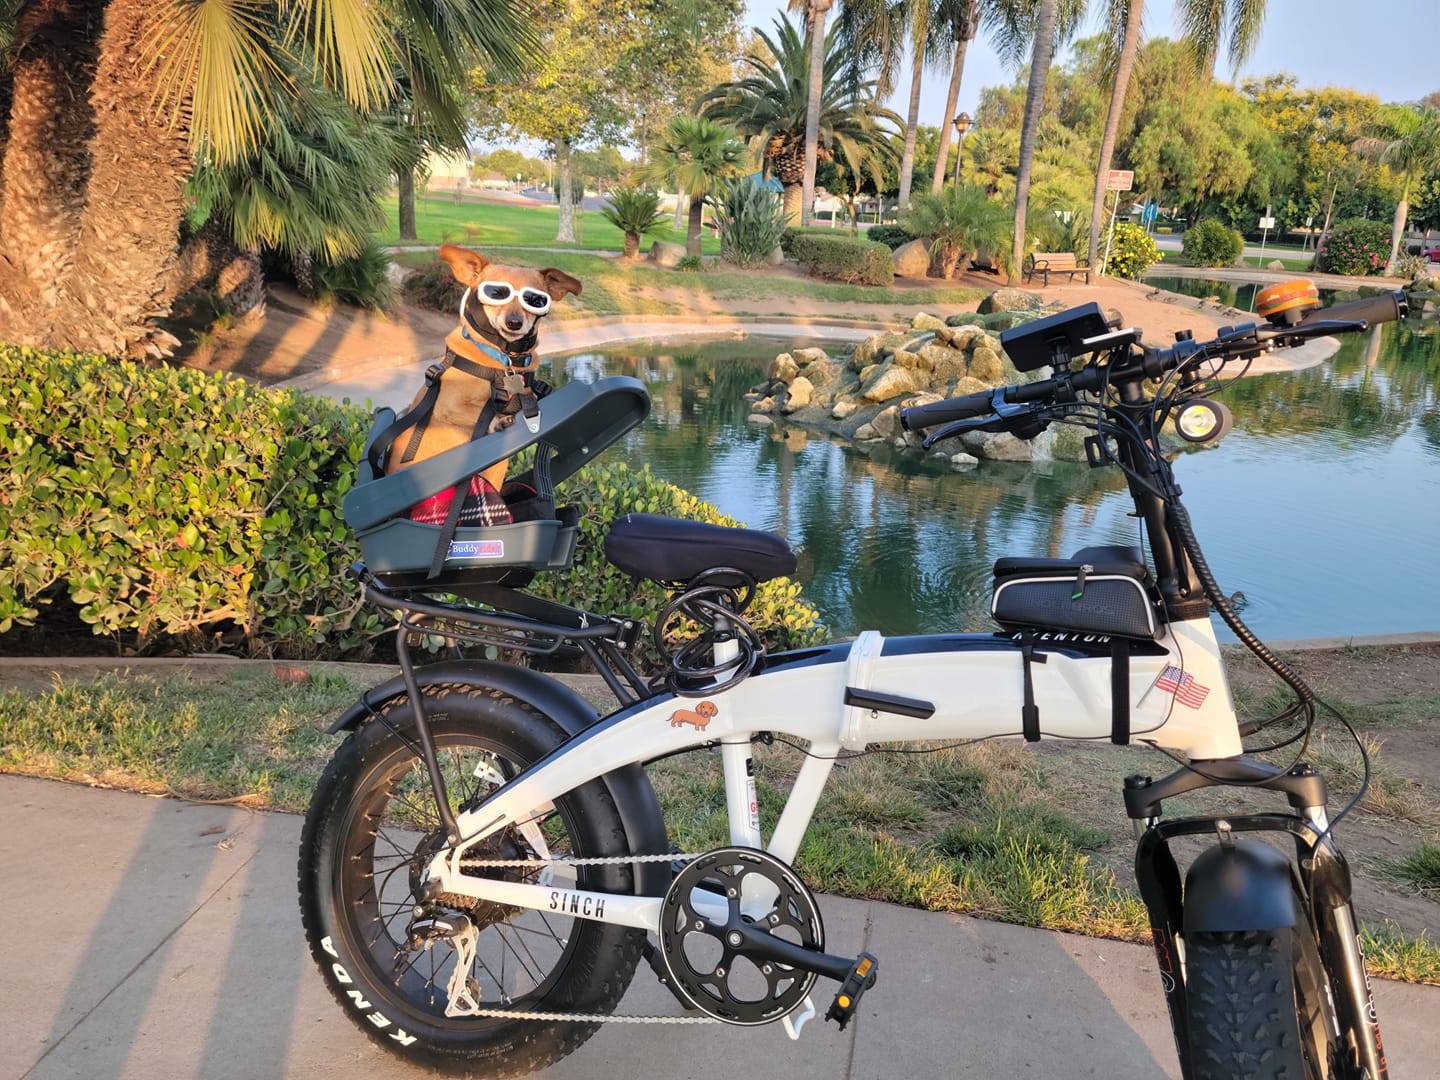 White Sinch ebike with stickers as an accessory and dog companion riding in the rear.